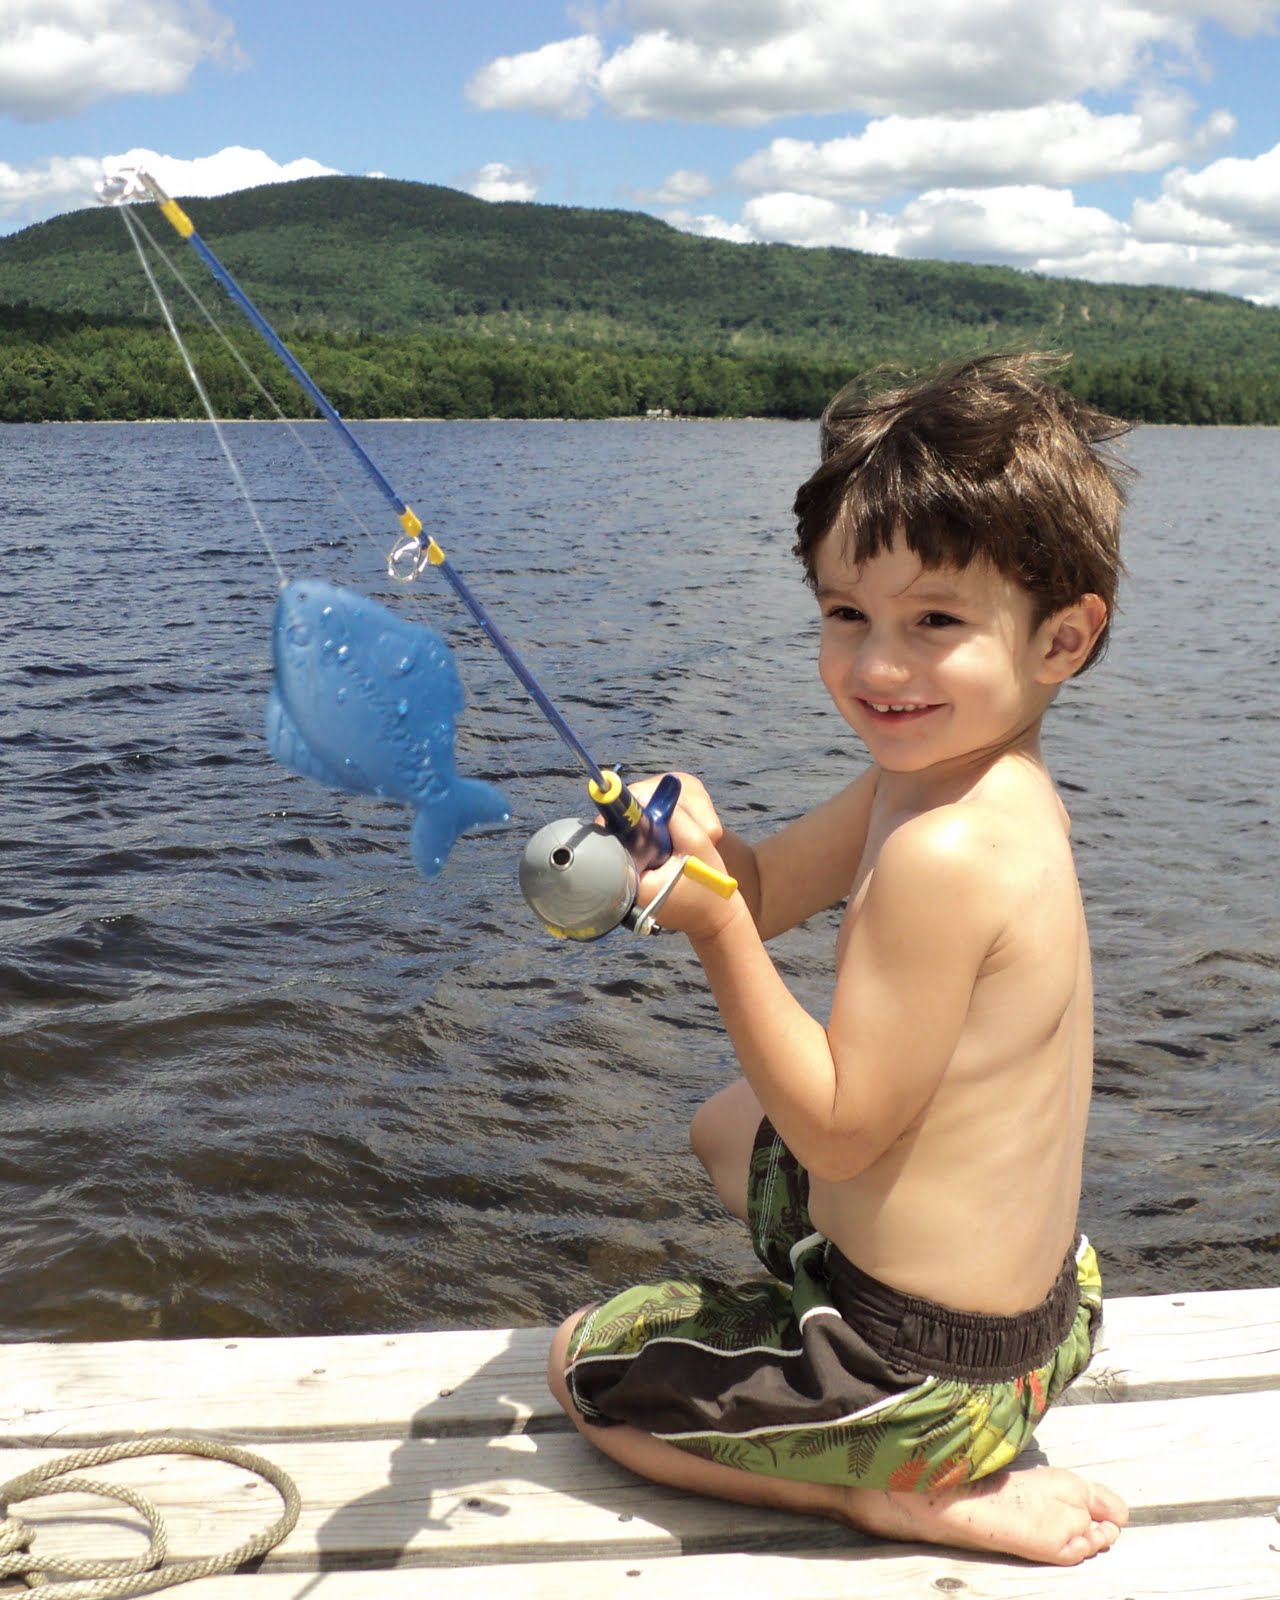 The Maine Outdoorsman: Hook Kids Into Fishing - Putting it All Together